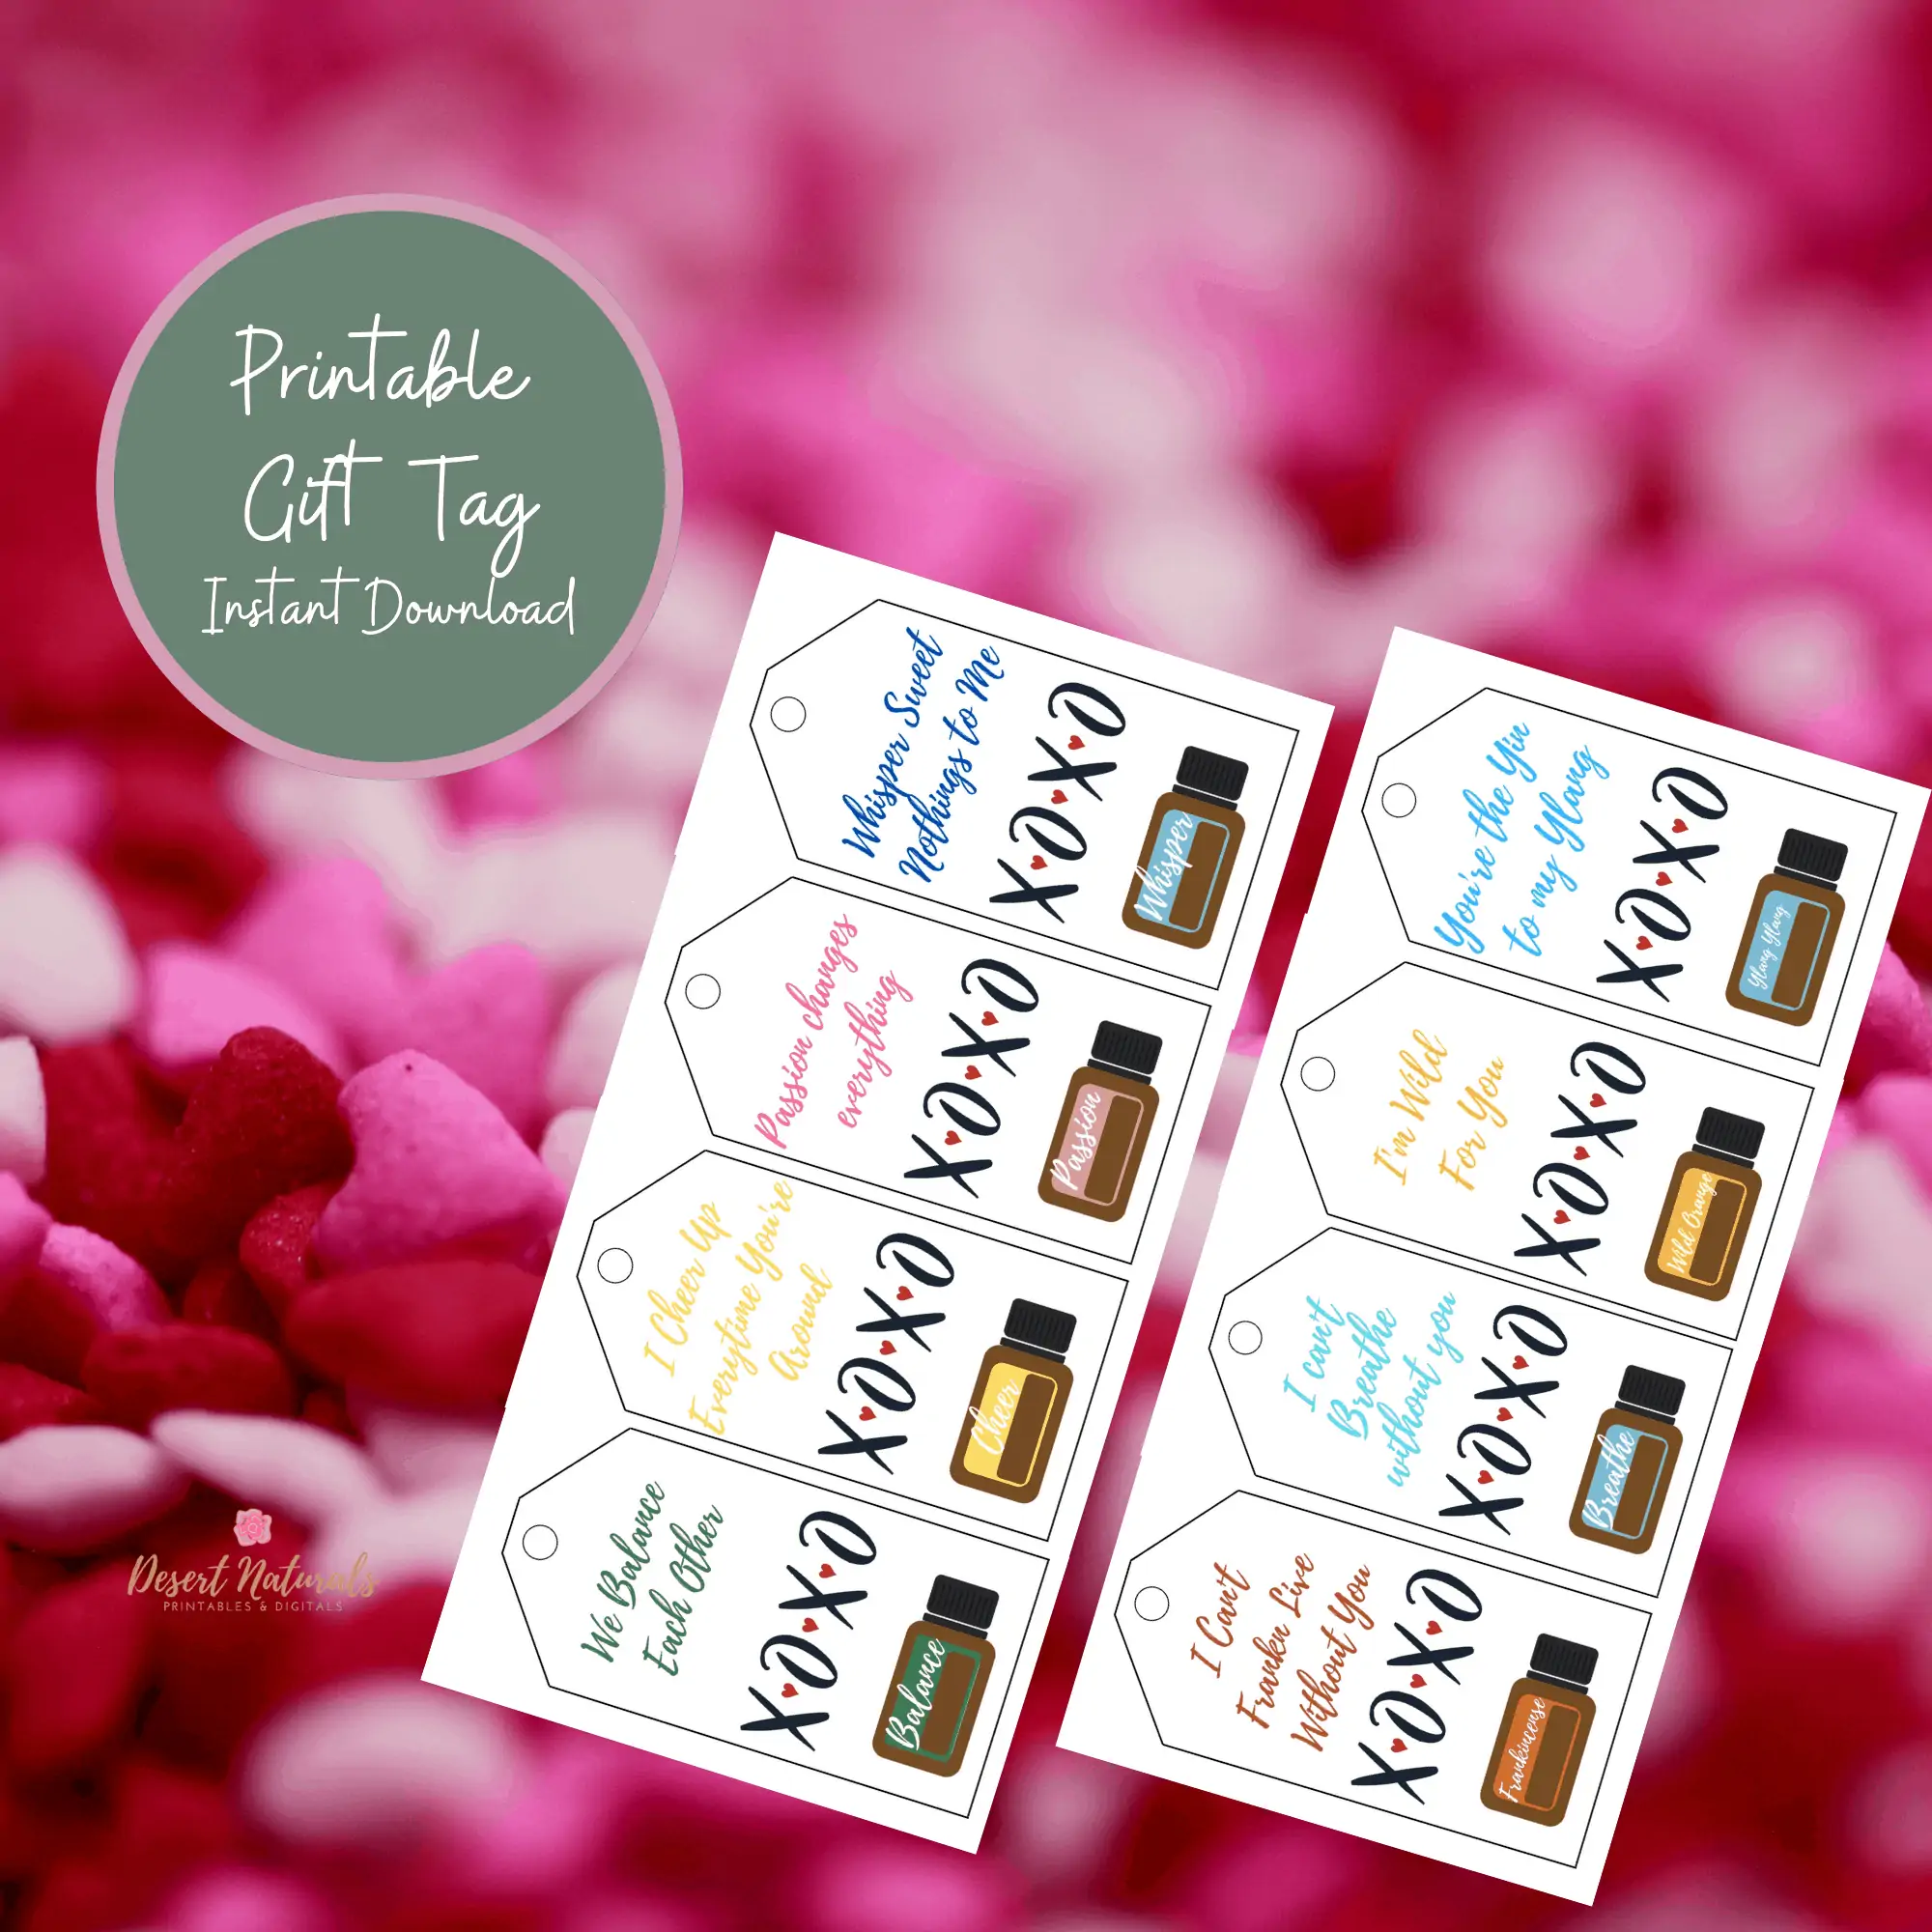 doterra essential oil gift tags with cute quotes for valentines day